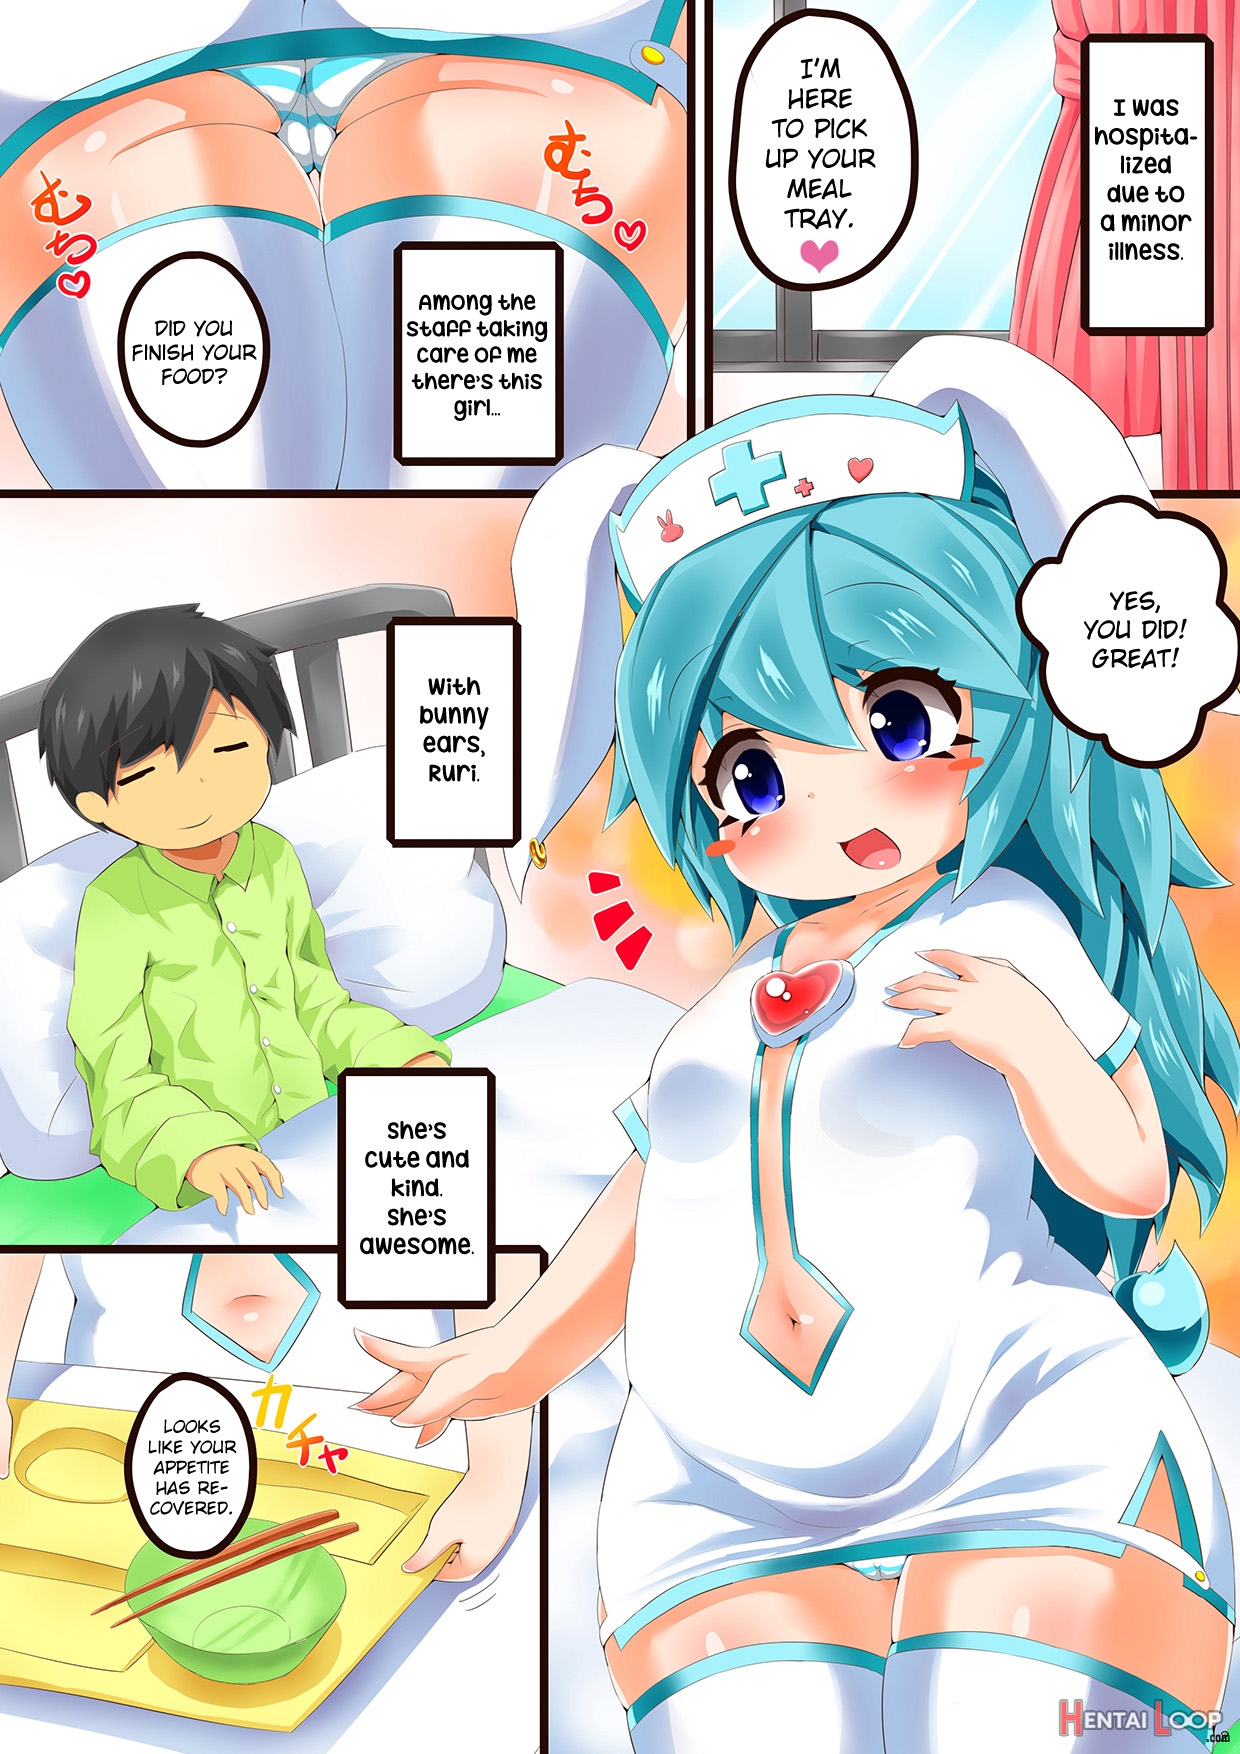 The Caring Journal Of A Passionate Bunny-eared Nurse. page 2